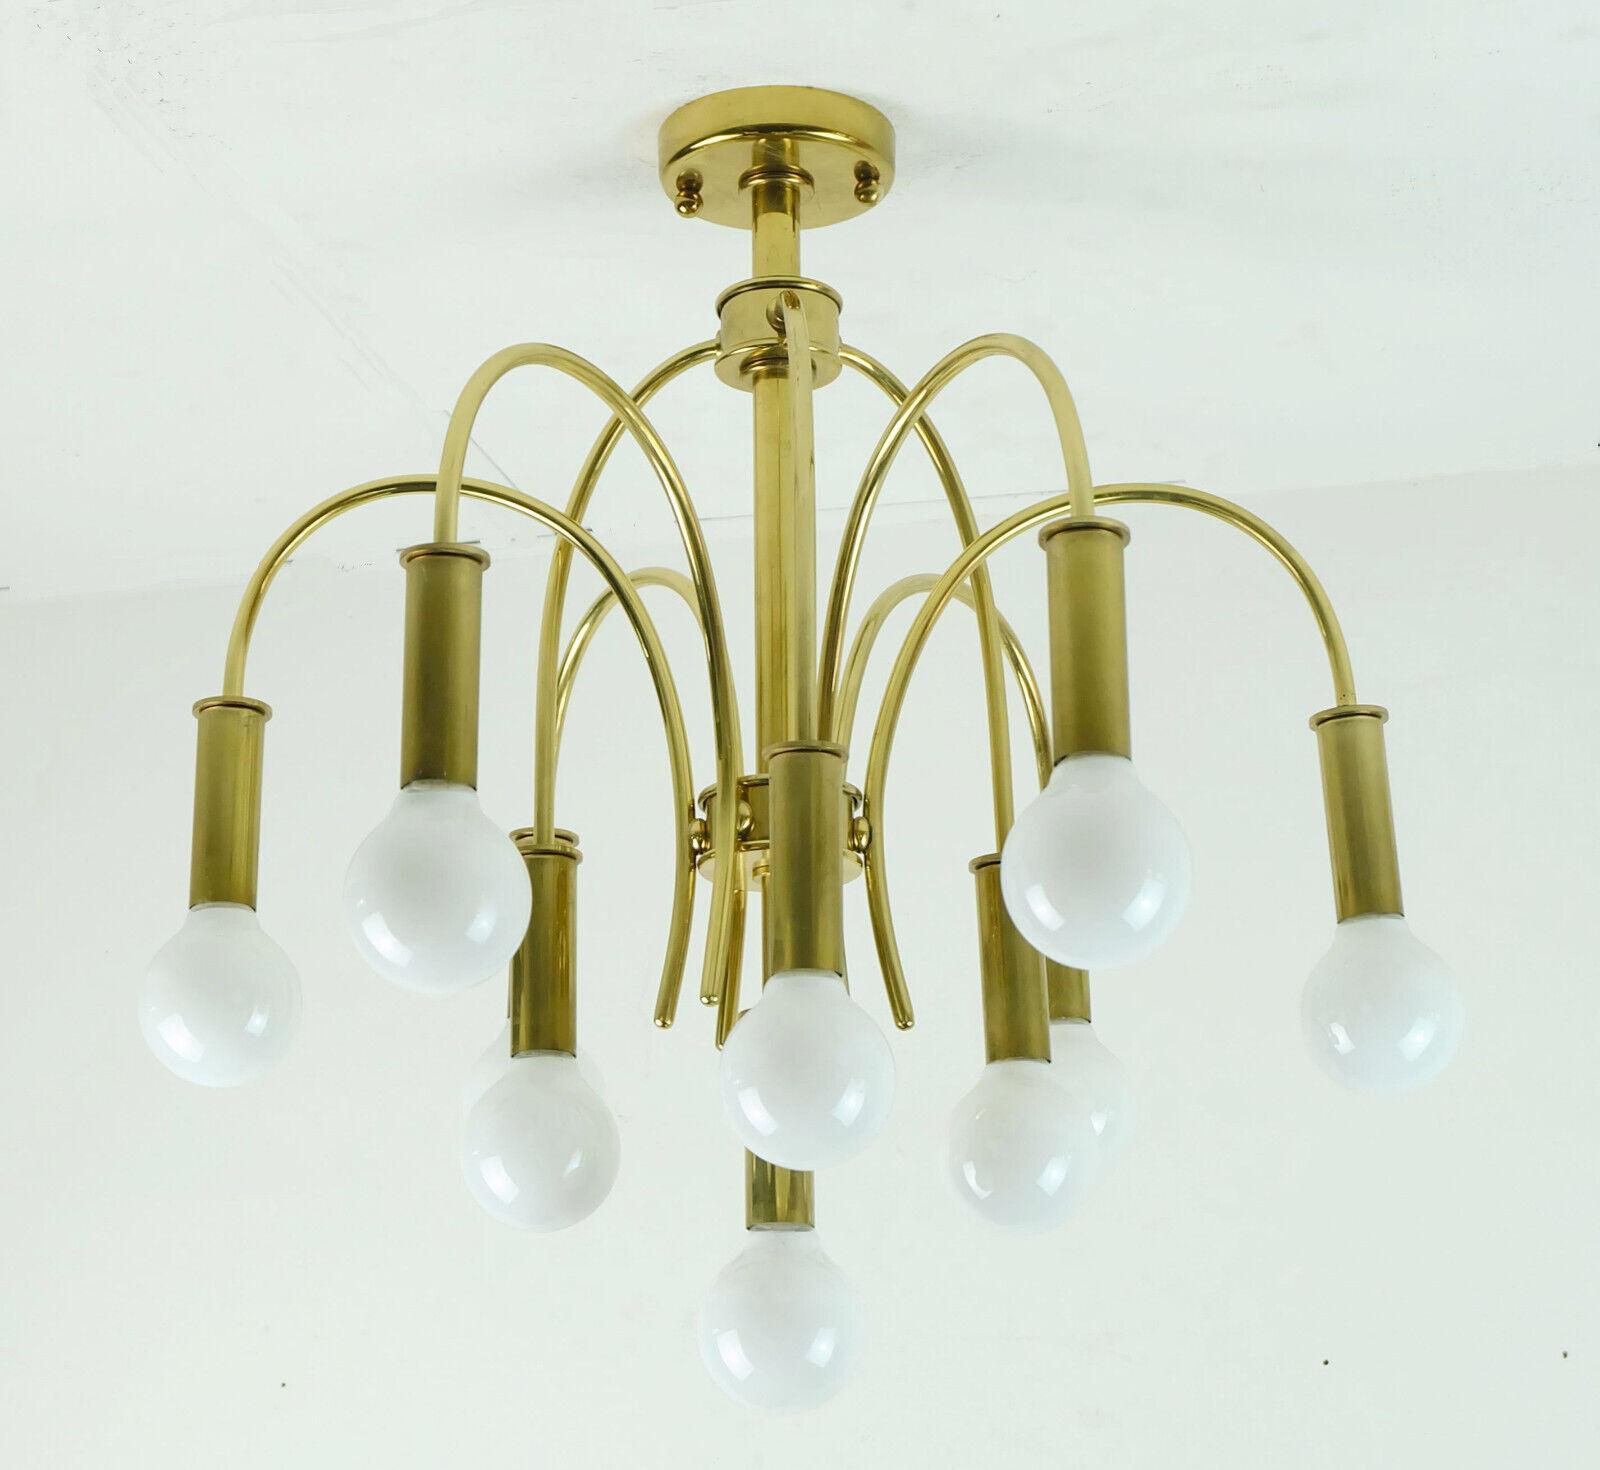 Fantastic large Sputnik ceiling lamp by Schröder & Co., manufactured in the 1970's. The lamp is made of brass, it has 10 curved arms that are placed at different heights.
Holds 10 E14 bulbs (bulbs on the pictures are not included in the